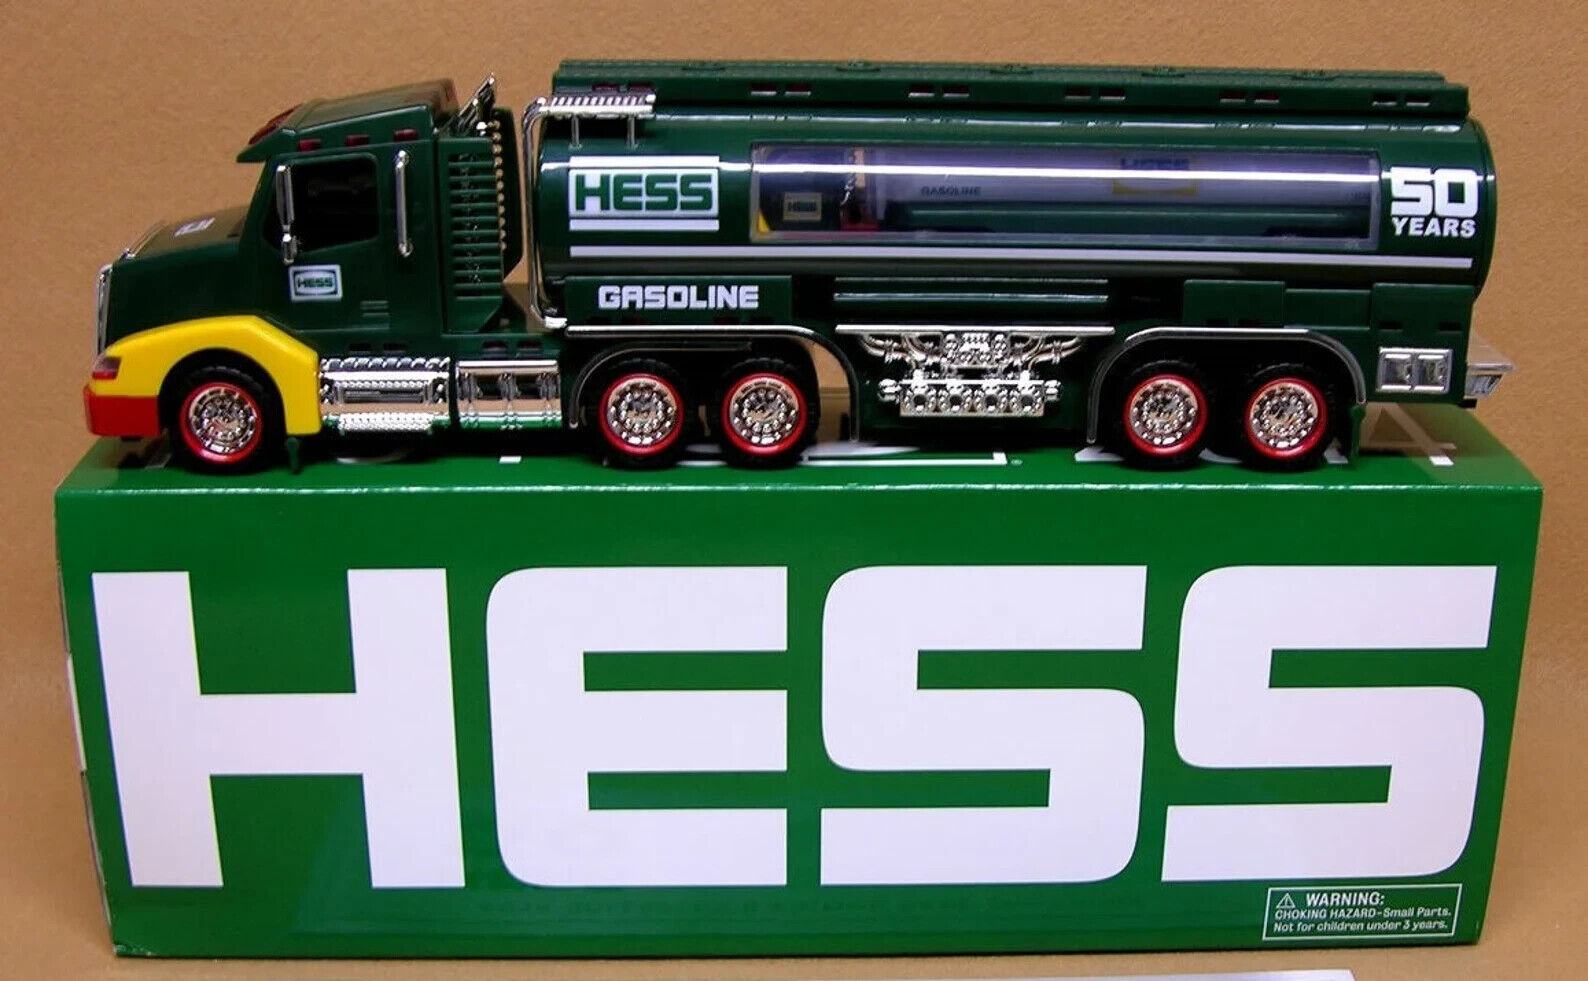 Hess 1964-2014 50th Anniversary Special Edition Tanker Truck New-in-Box